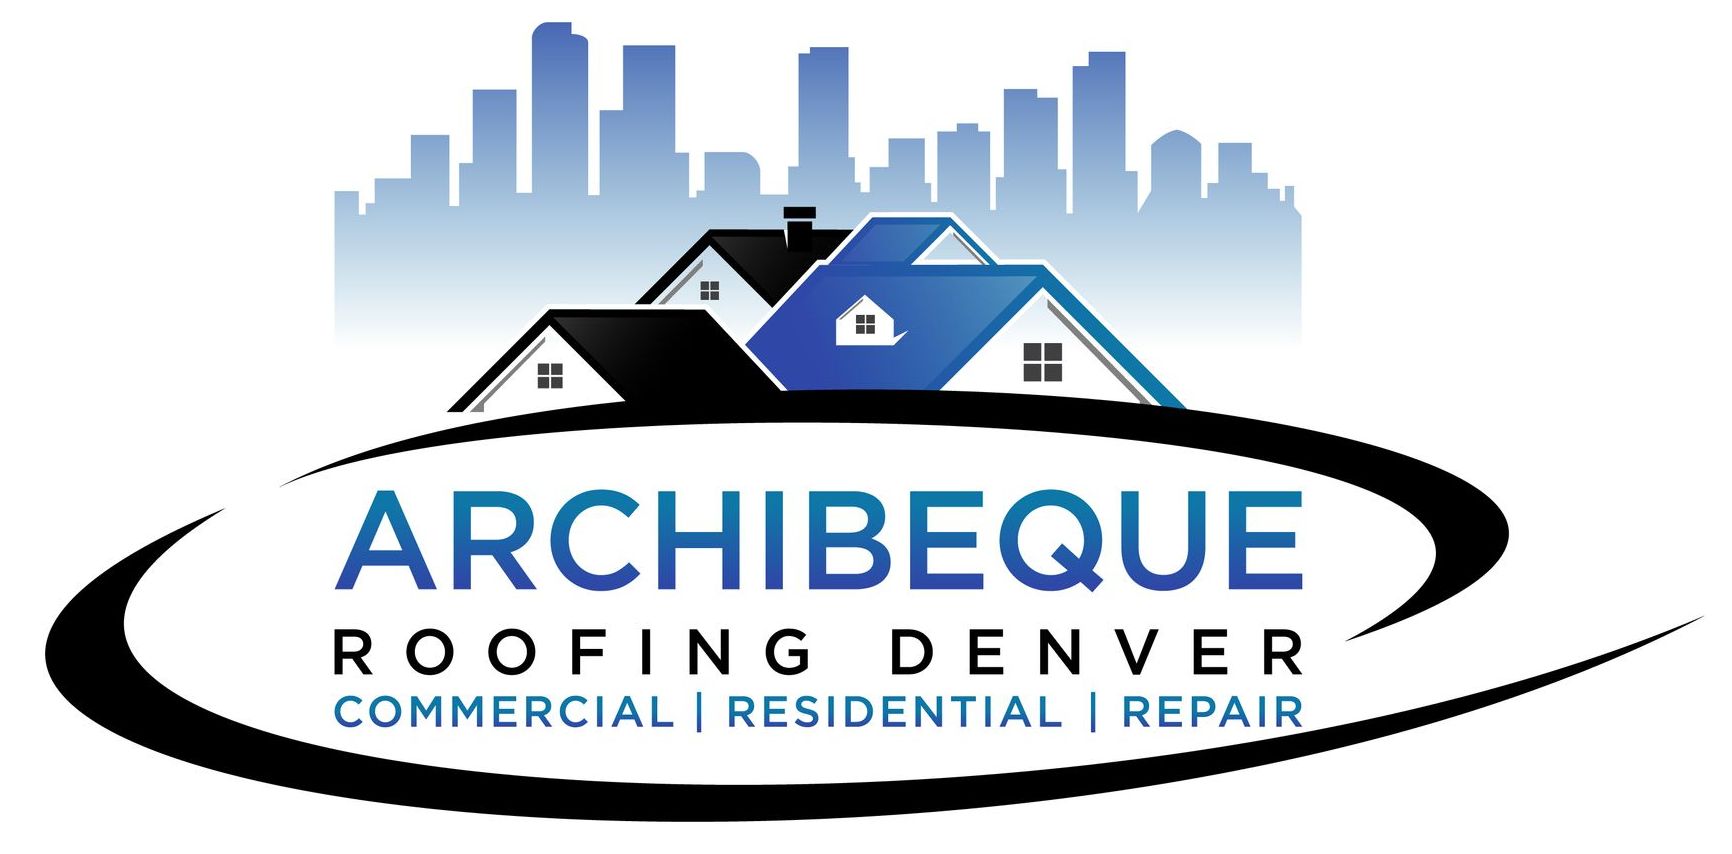 Archibeque+roofing+commercial+residental+professional+colorado+roofing+install+repair